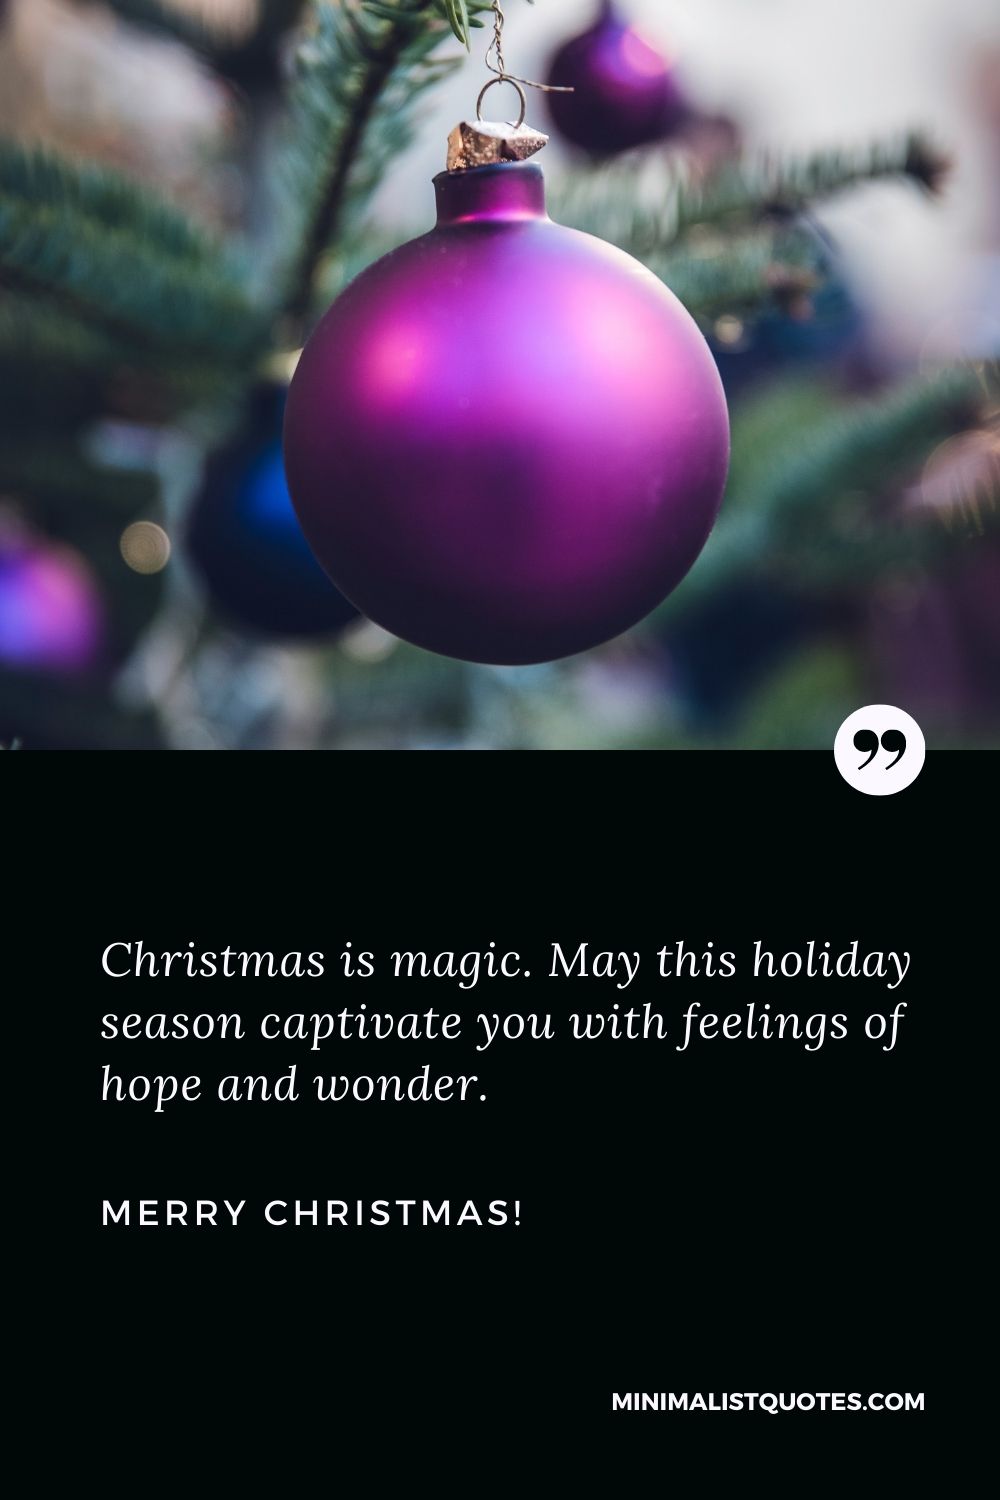 Heartwarming Christmas message: Christmas is magic. May this holiday season captivate you with feelings of hope and wonder. Merry Christmas!